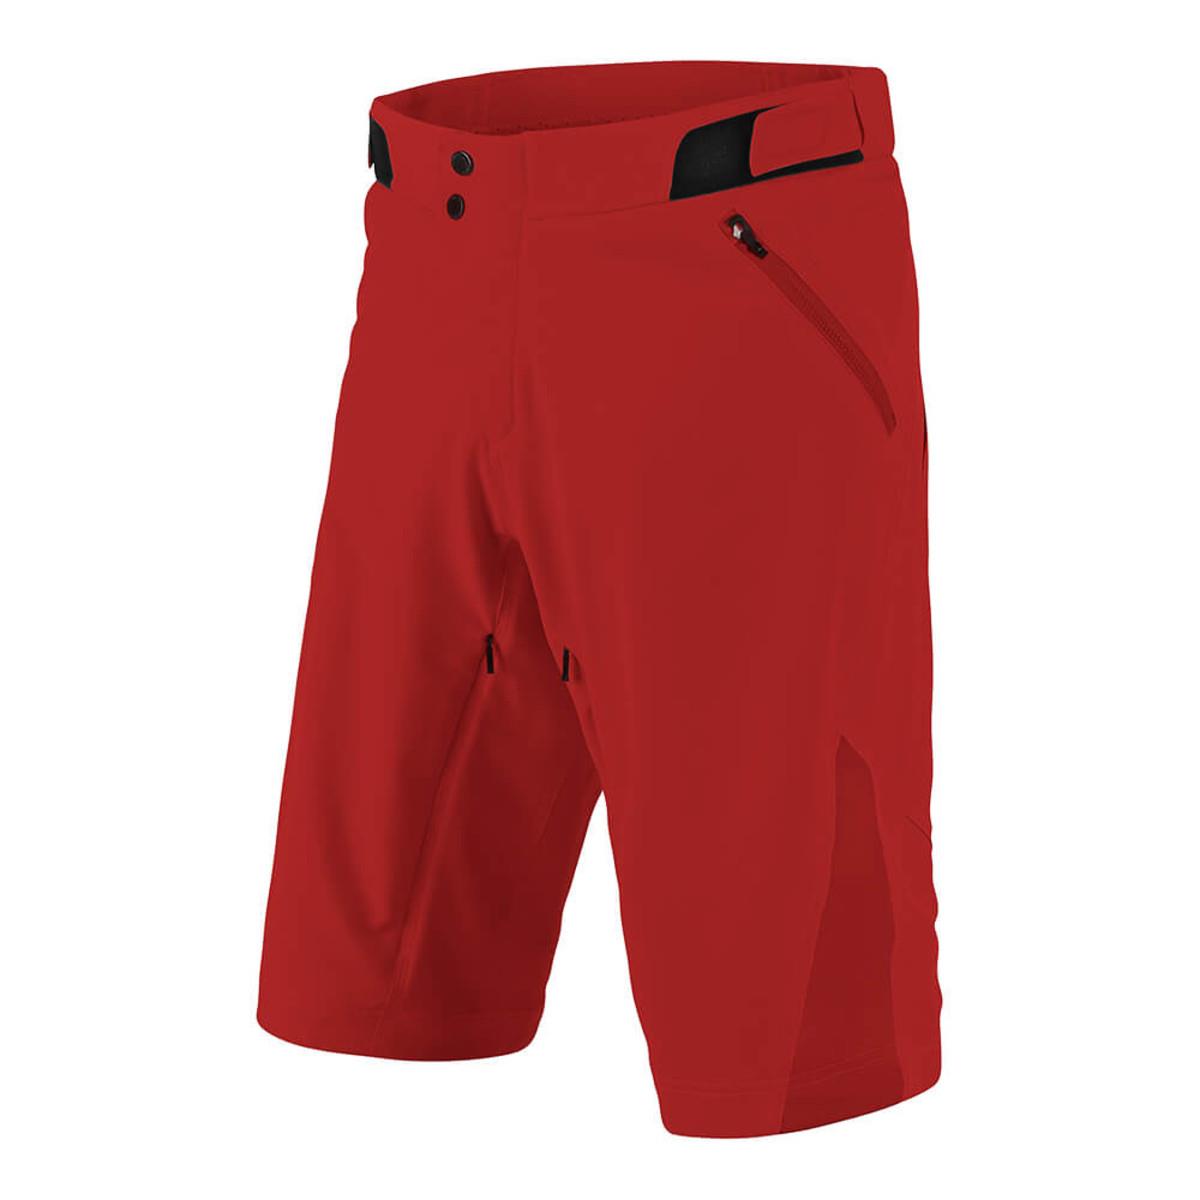 Troy Lee Designs Trail Short Ruckus Shell - Red